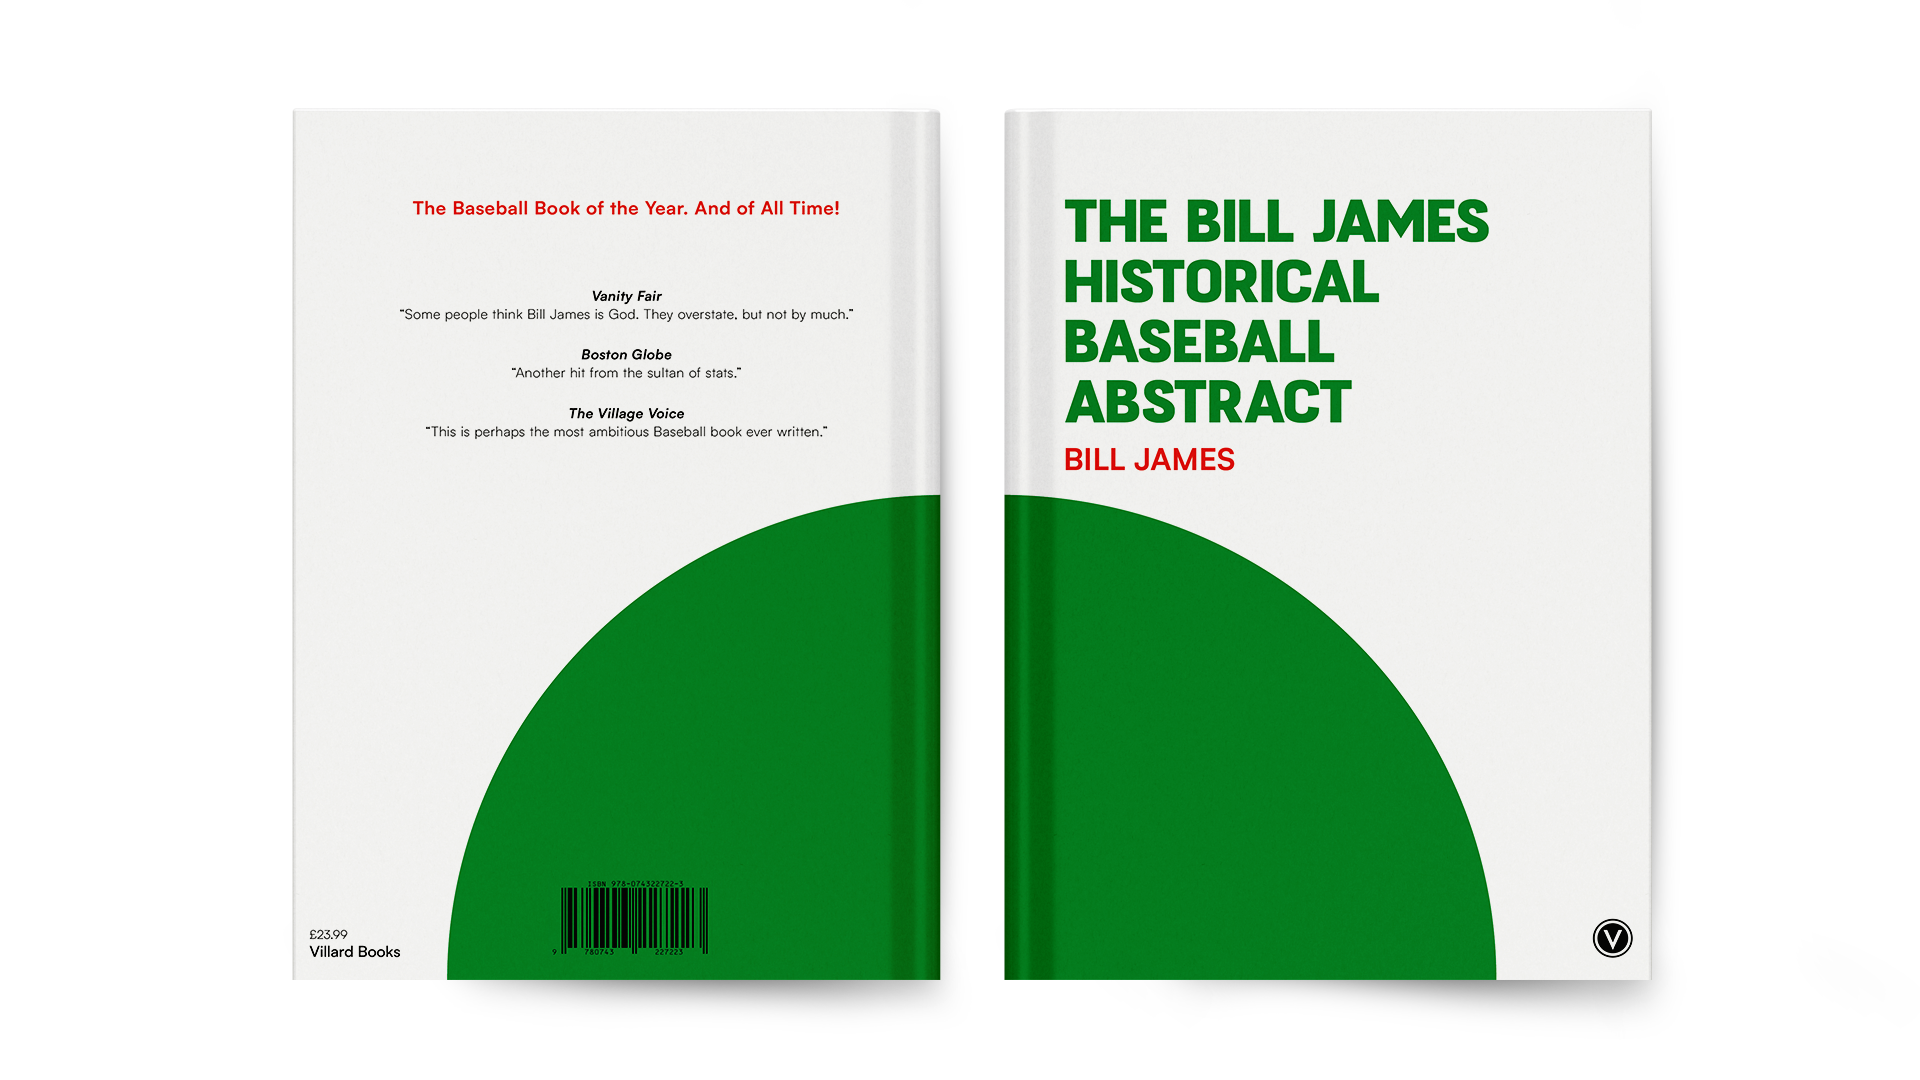 Front and back book cover by Lilith Onyett showing a clean design of green, red and black type and a green half circle spread across the the front and back cover.